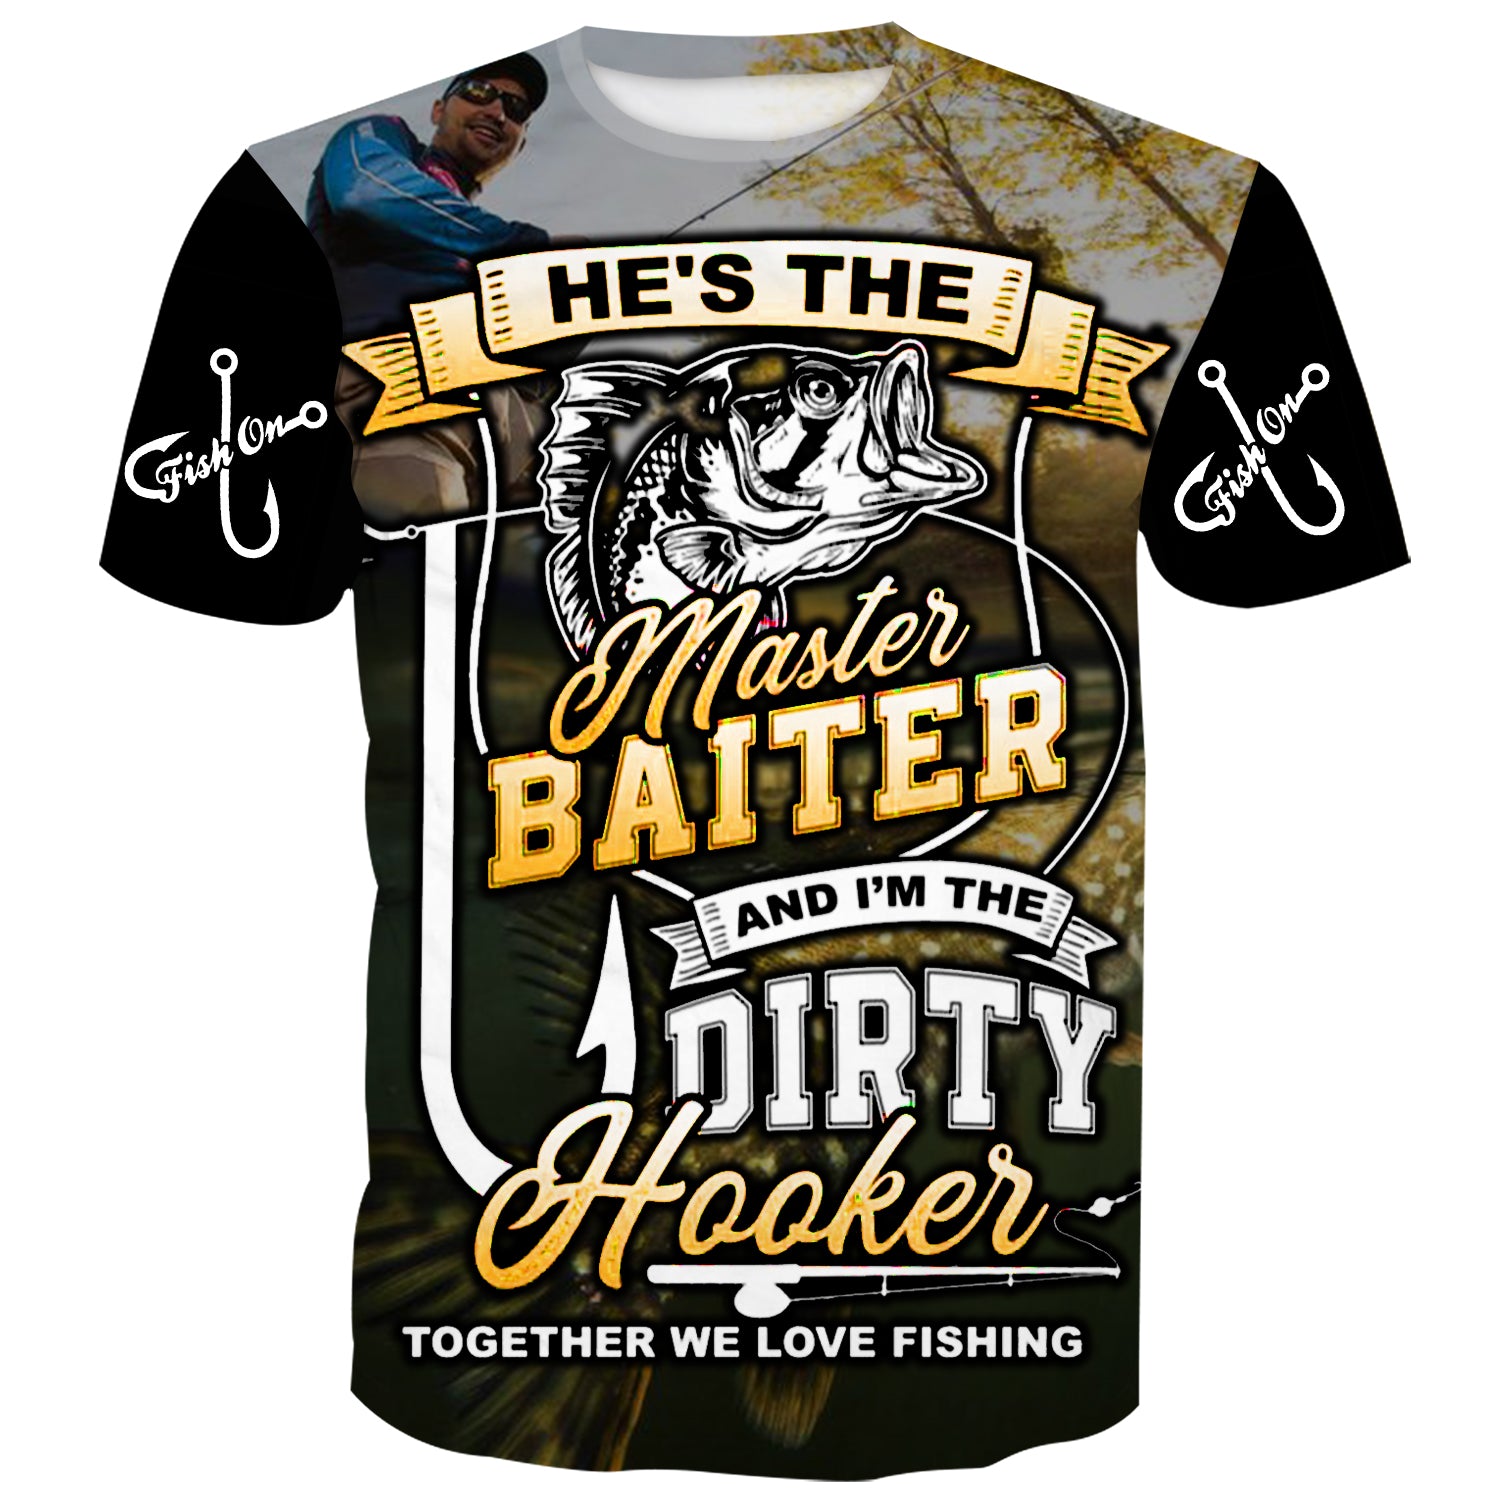 He's the master baiter and I'm the dirty hooker, together we love fishing - T-Shirt